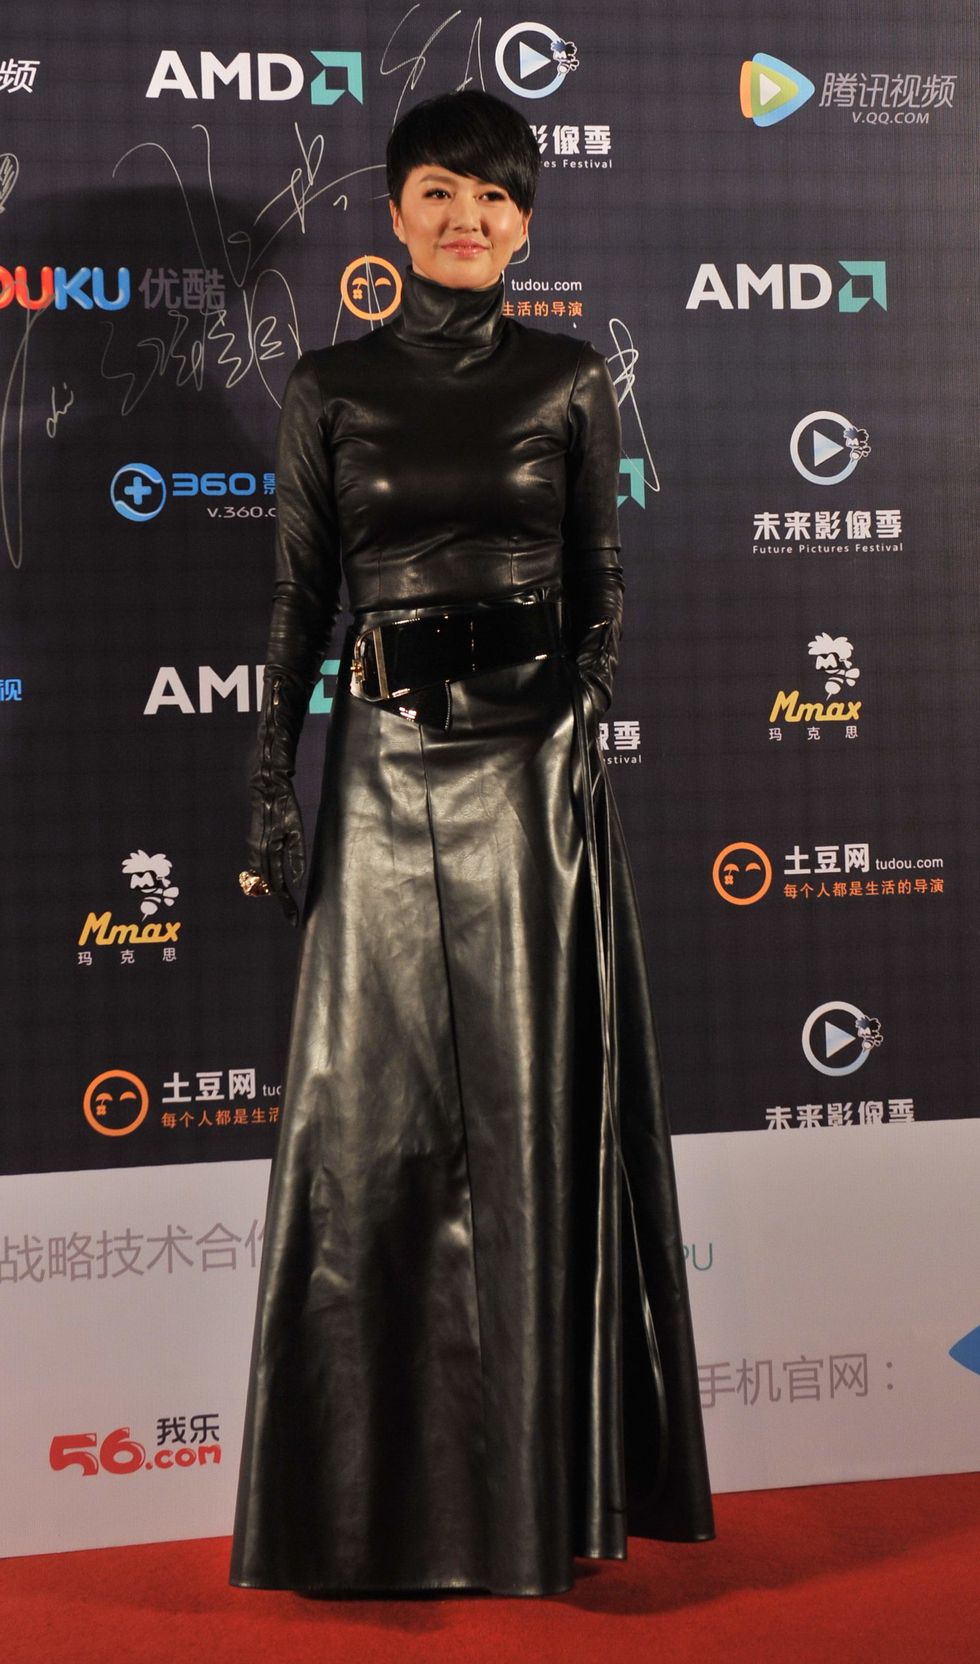 Red carpet, Carpet, Clothing, Flooring, Dress, Outerwear, Premiere, Event, Fictional character, Costume, 